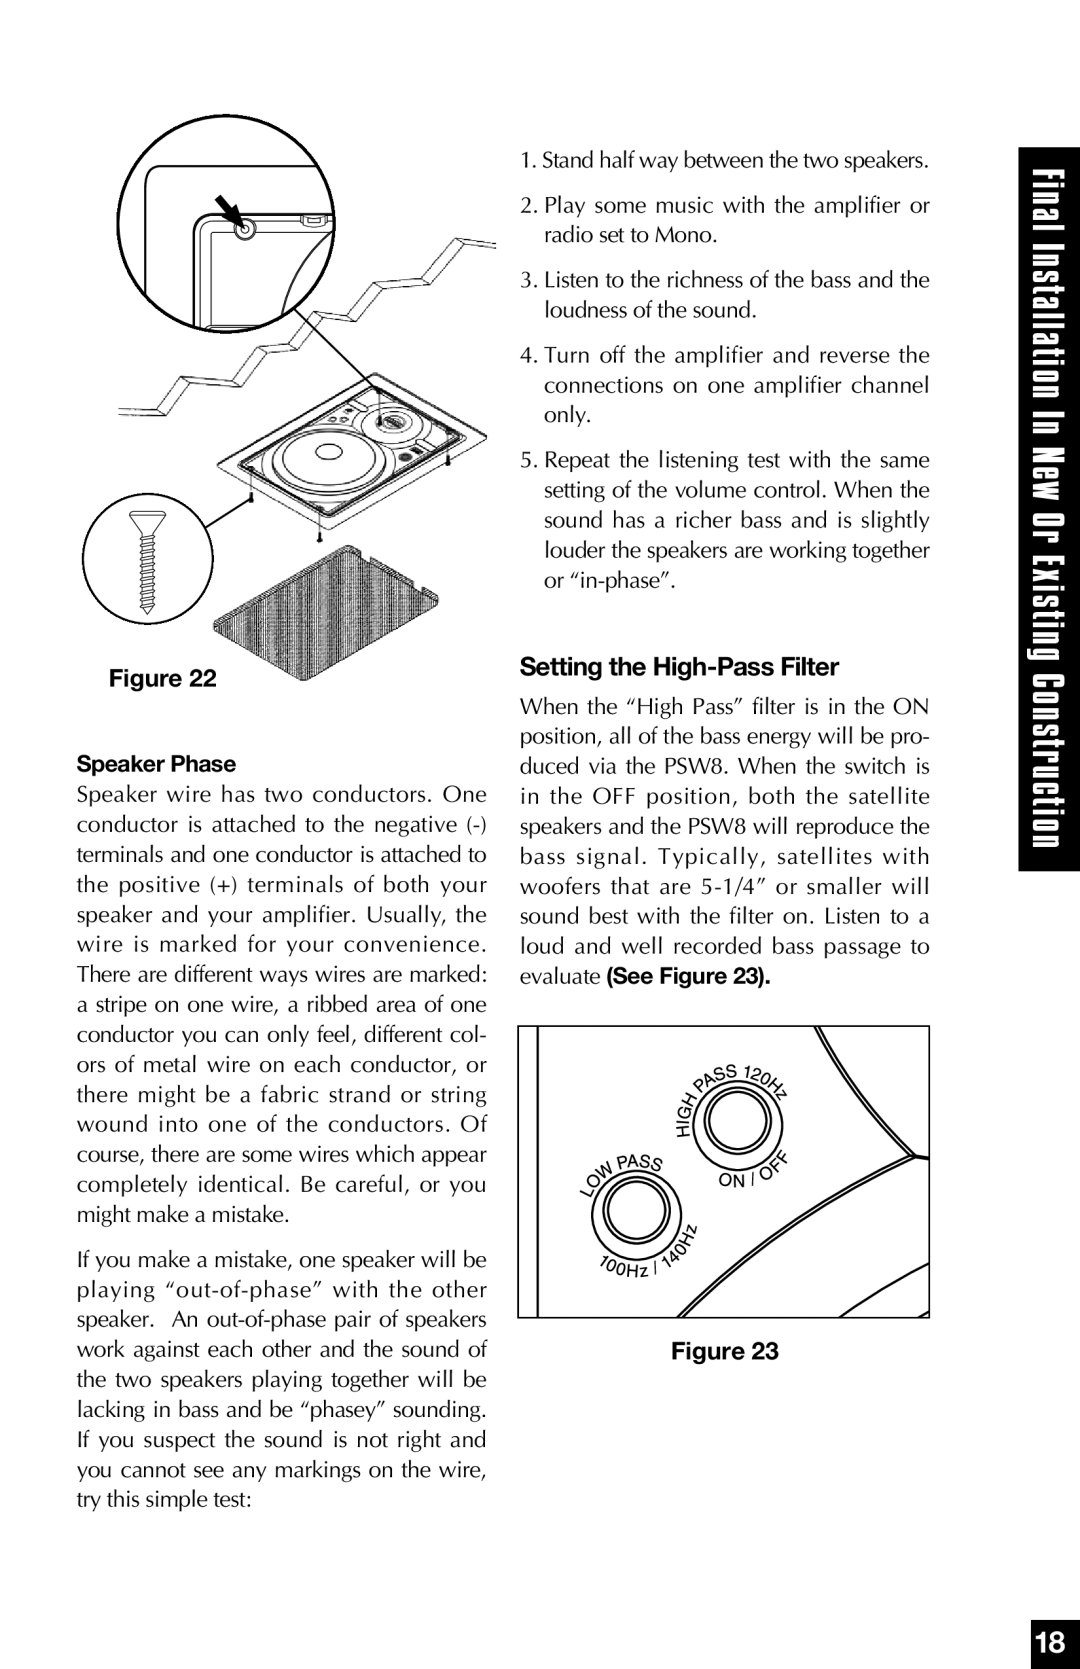 Niles Audio PSW8 manual Setting the High-PassFilter, Speaker Phase 